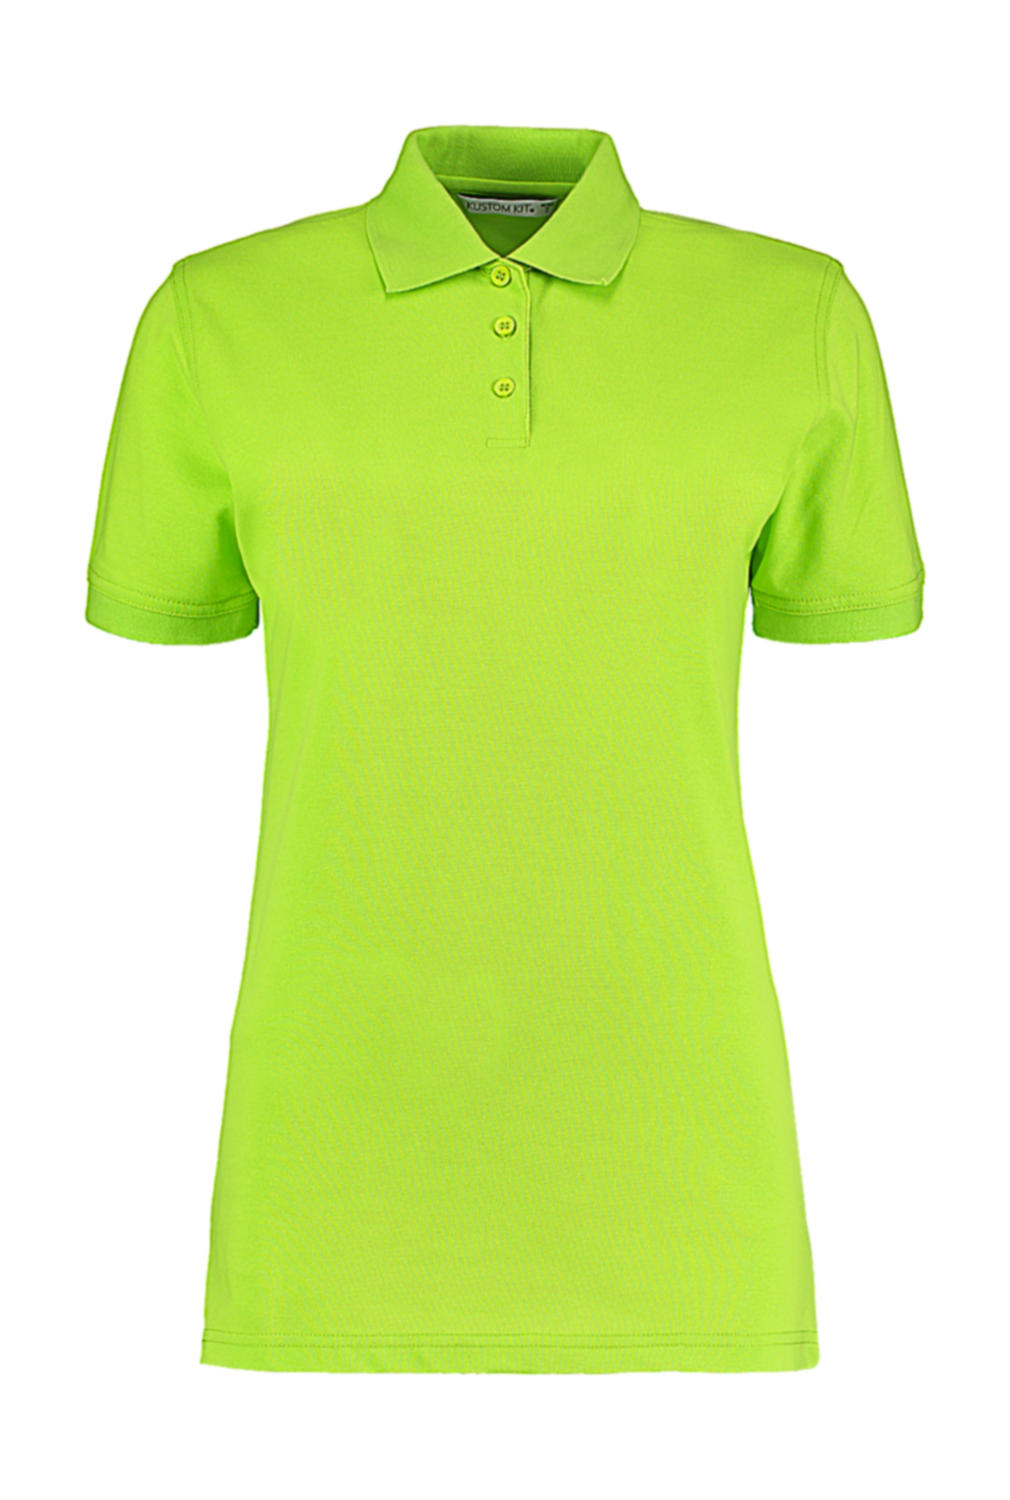  Ladies Classic Fit Polo Superwash? 60? in Farbe Lime